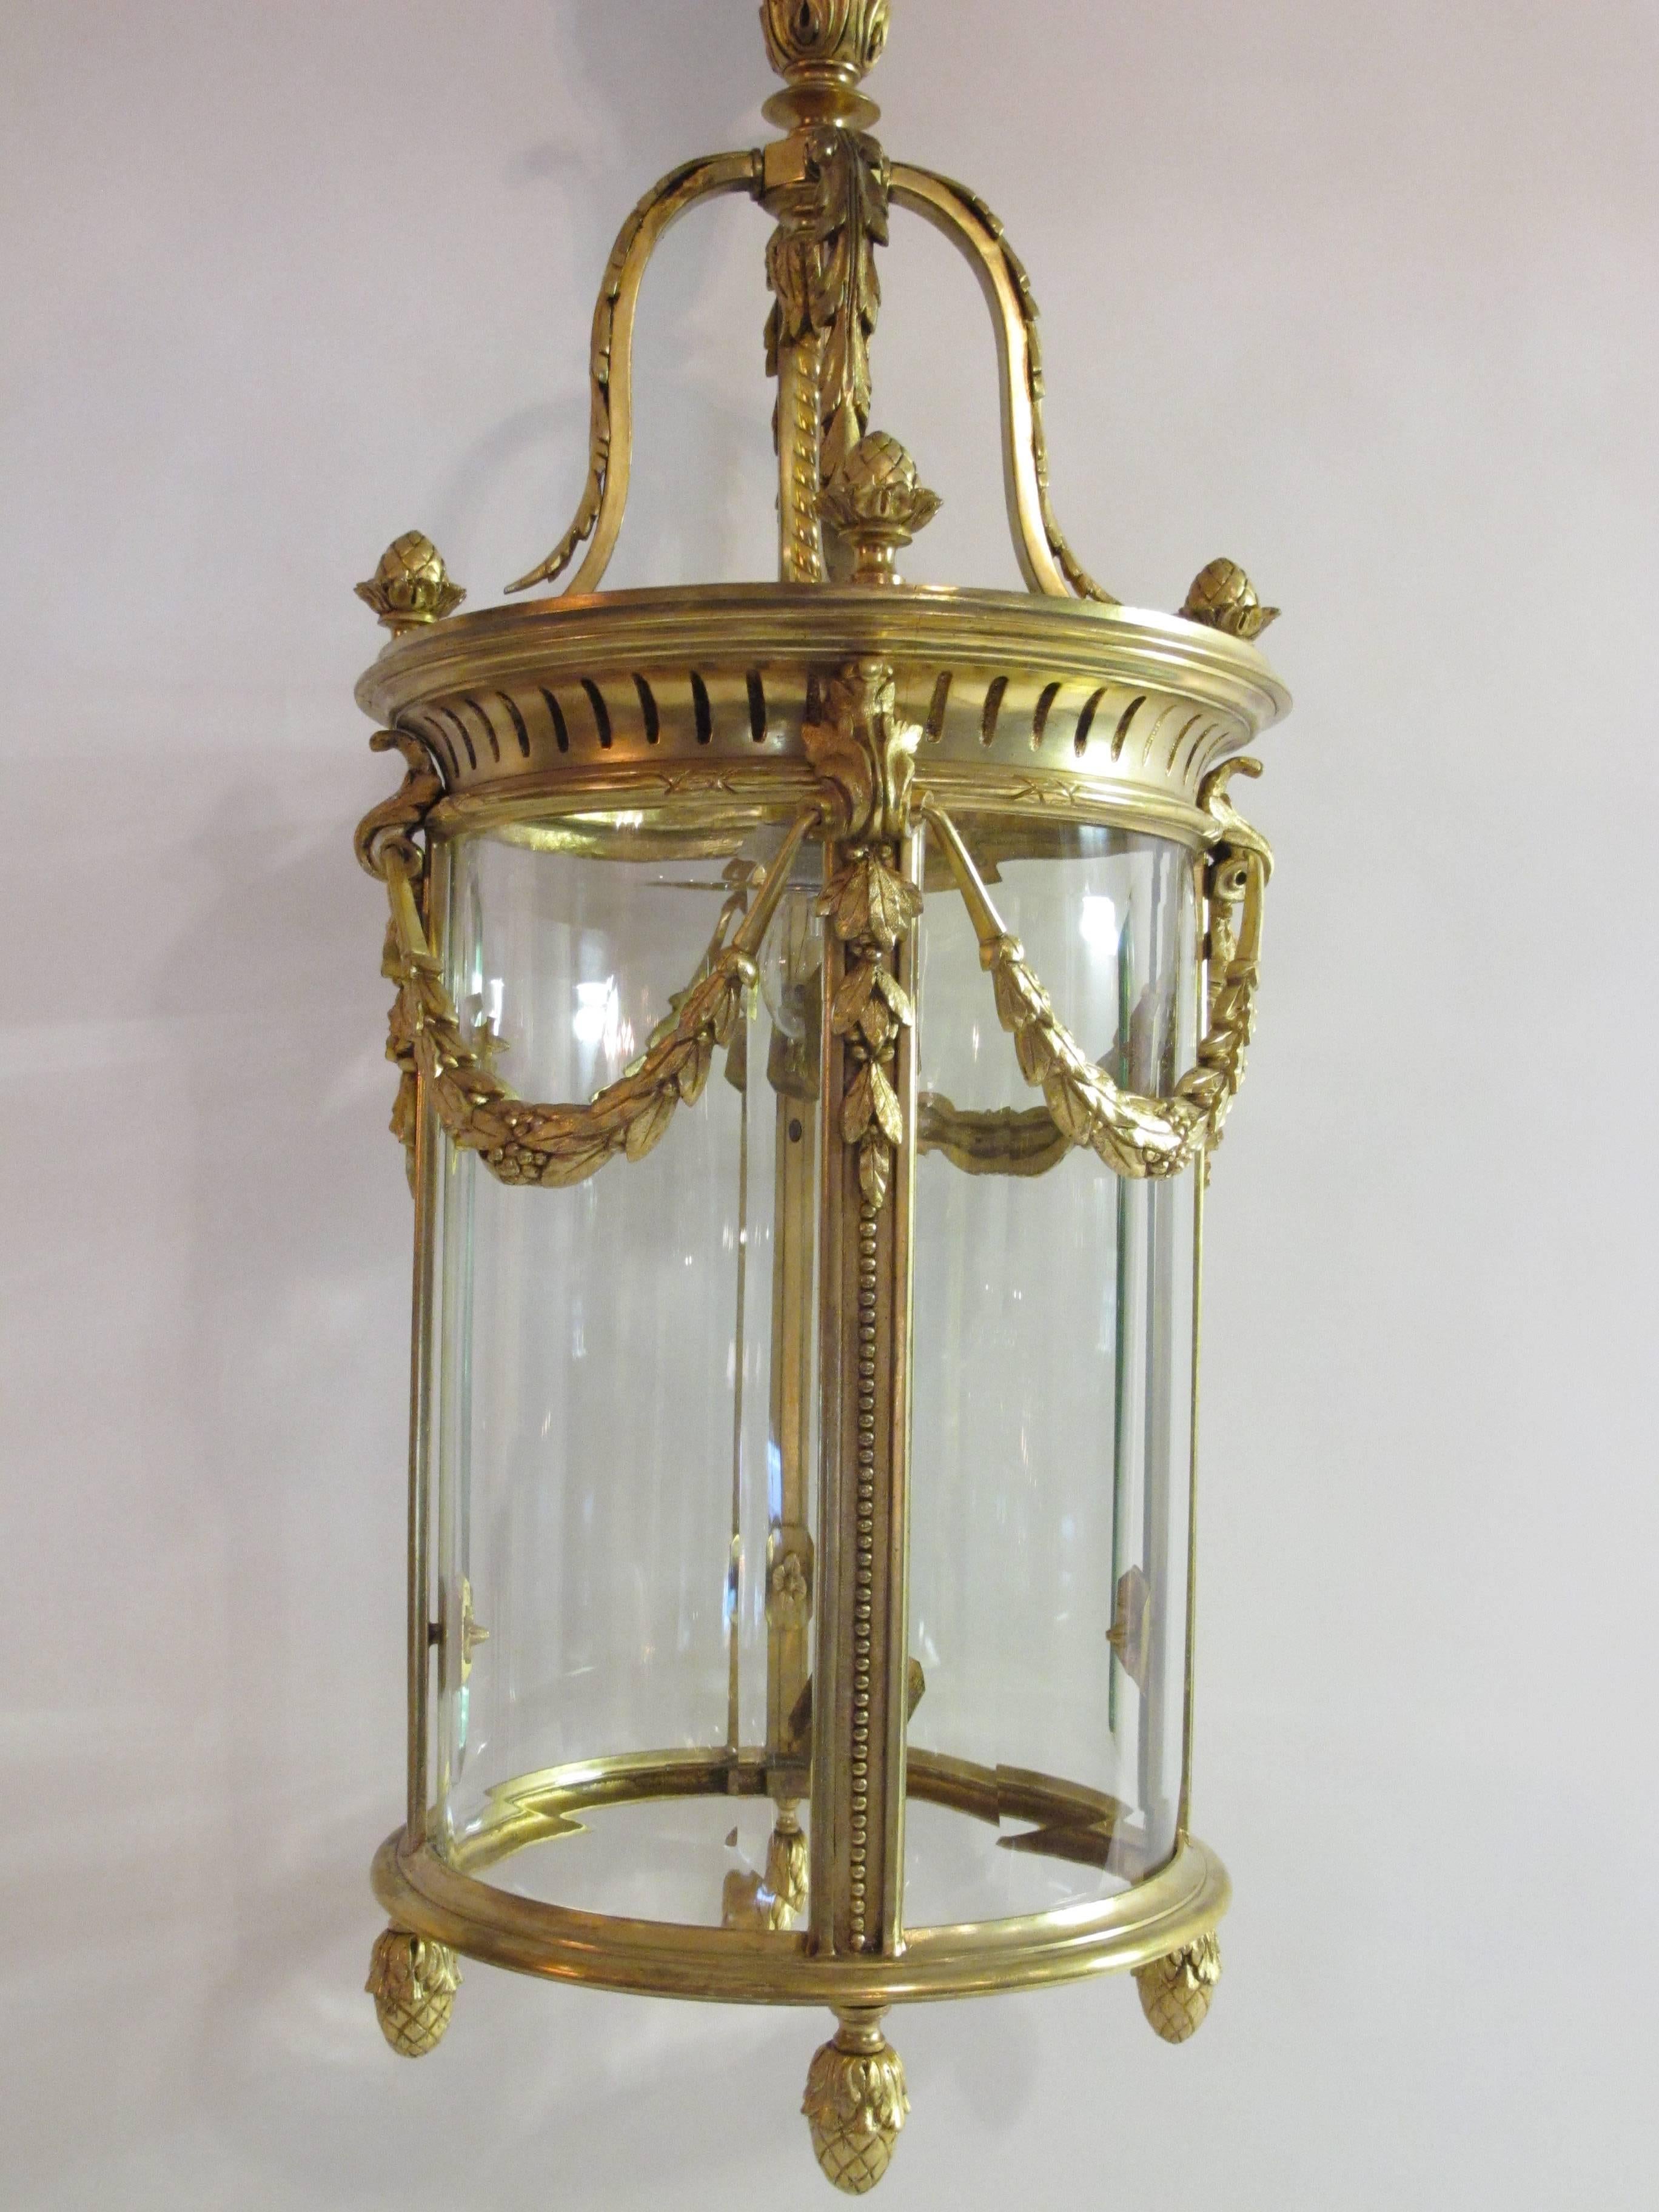 An exquisite French Louis XVI style gilt bronze and glass, one light lantern of Fine detail embellished gilt bronze floral wreaths, with cut-glass, France, circa 1930.